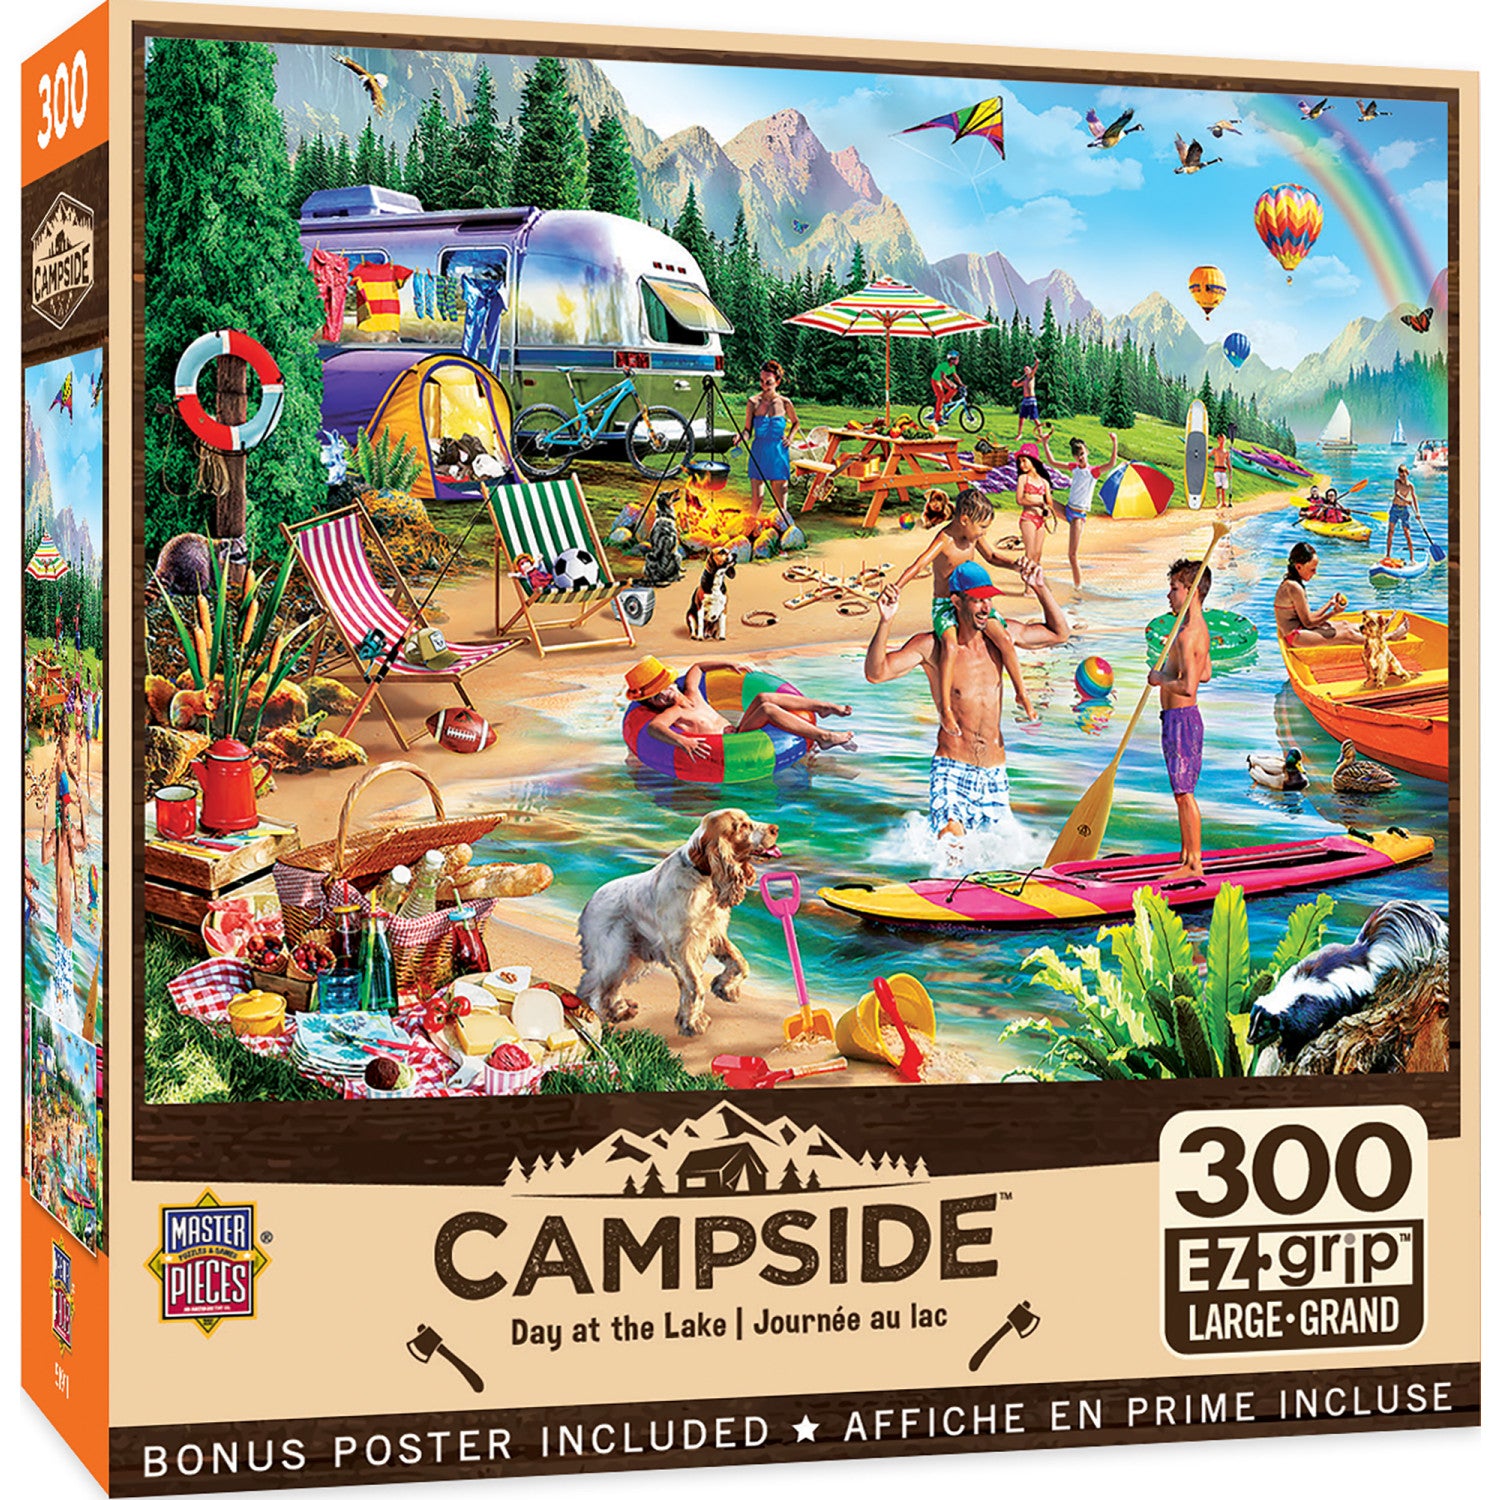 Campside - Day at the Lake 300 Piece EZ Grip Jigsaw Puzzle